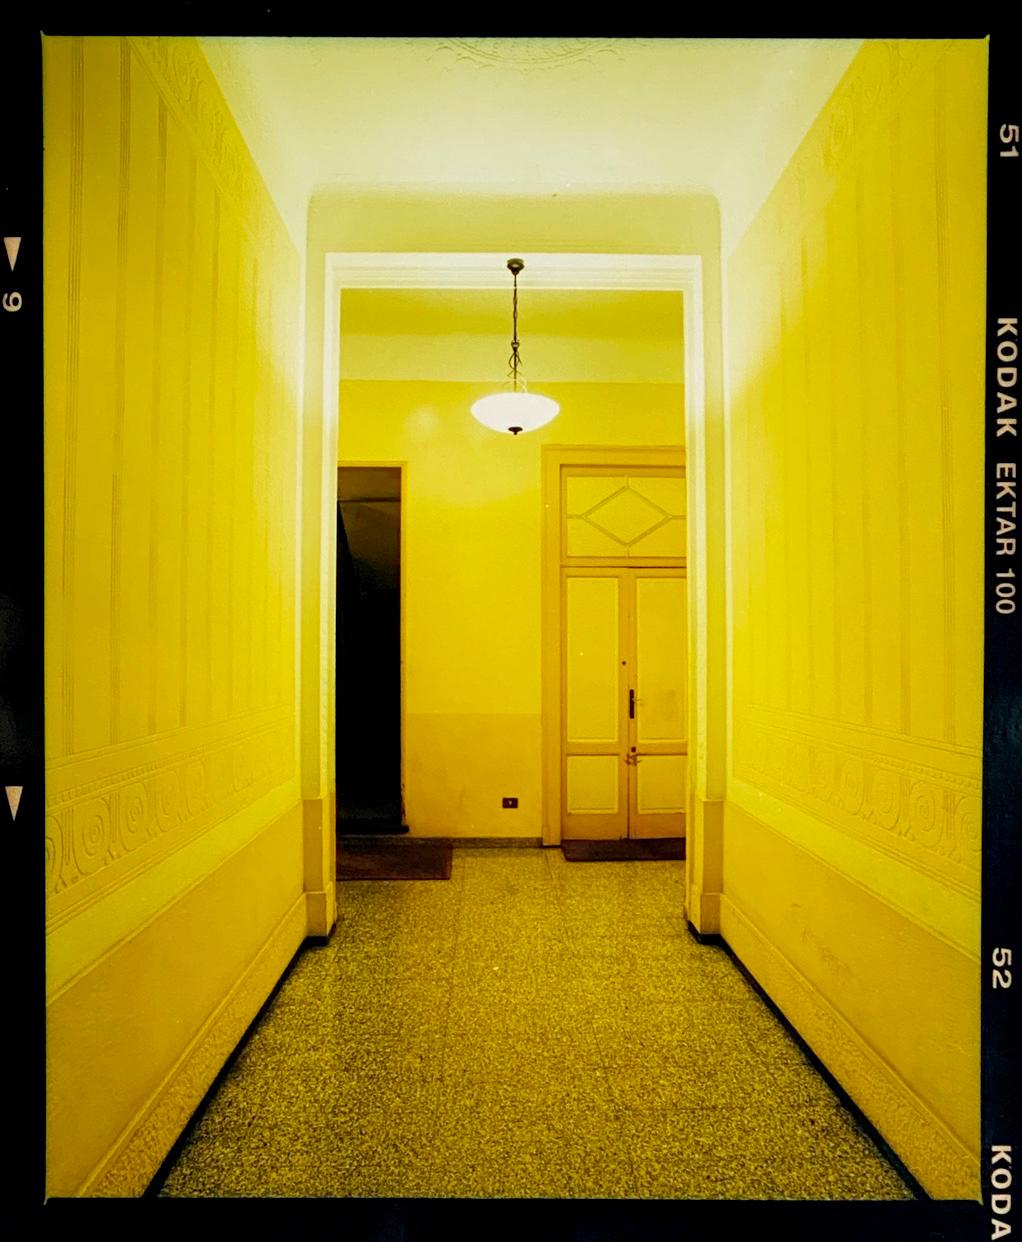 Yellow Corridor Night, from Richard Heeps series, 'A Short History of Milan' which began in November 2018 for a special project featuring at the Affordable Art Fair Milan 2019 and the series is ongoing.
There is a reoccurring linear, structural